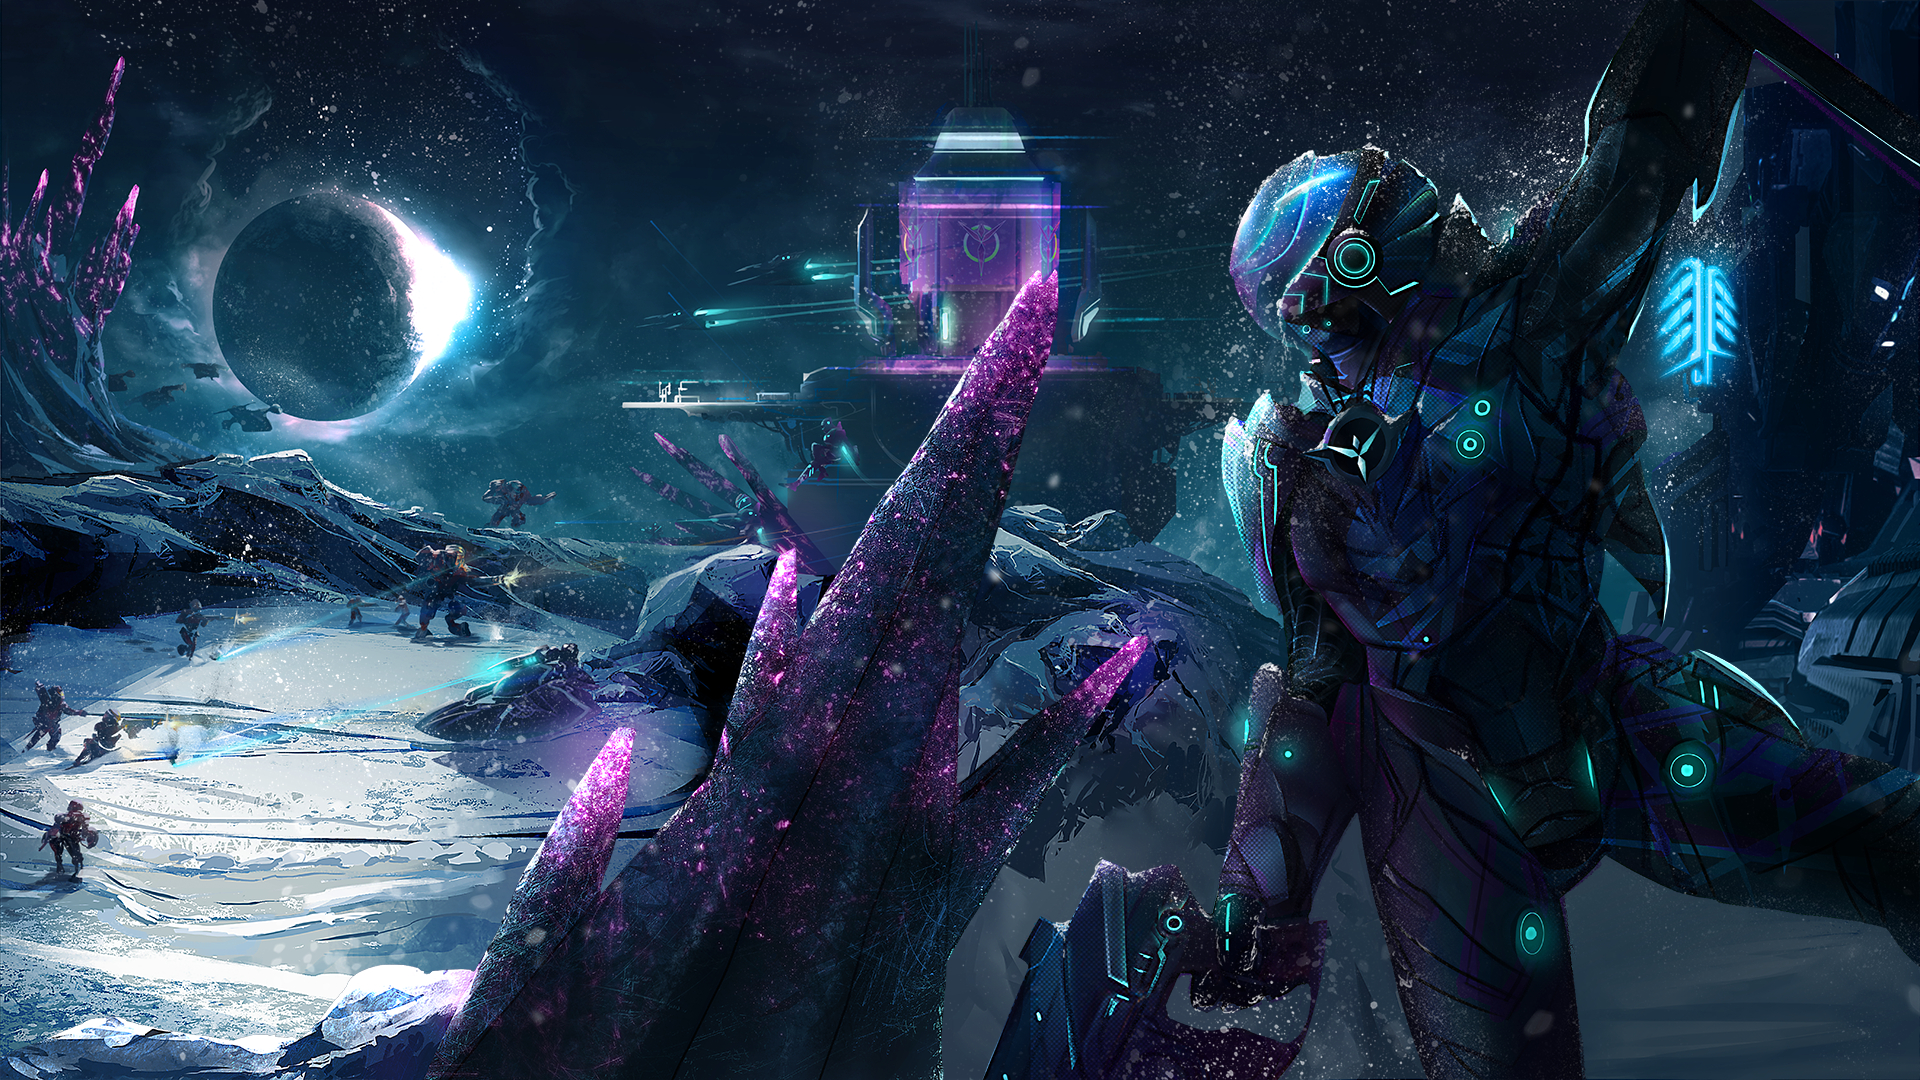 1920x1080 Wallpaper : science fiction, futuristic, battle, space, ice, spaceship, robot, Planetside 2, Vanu Sovereignty, video games Zyos 1360939 HD Wallpapers